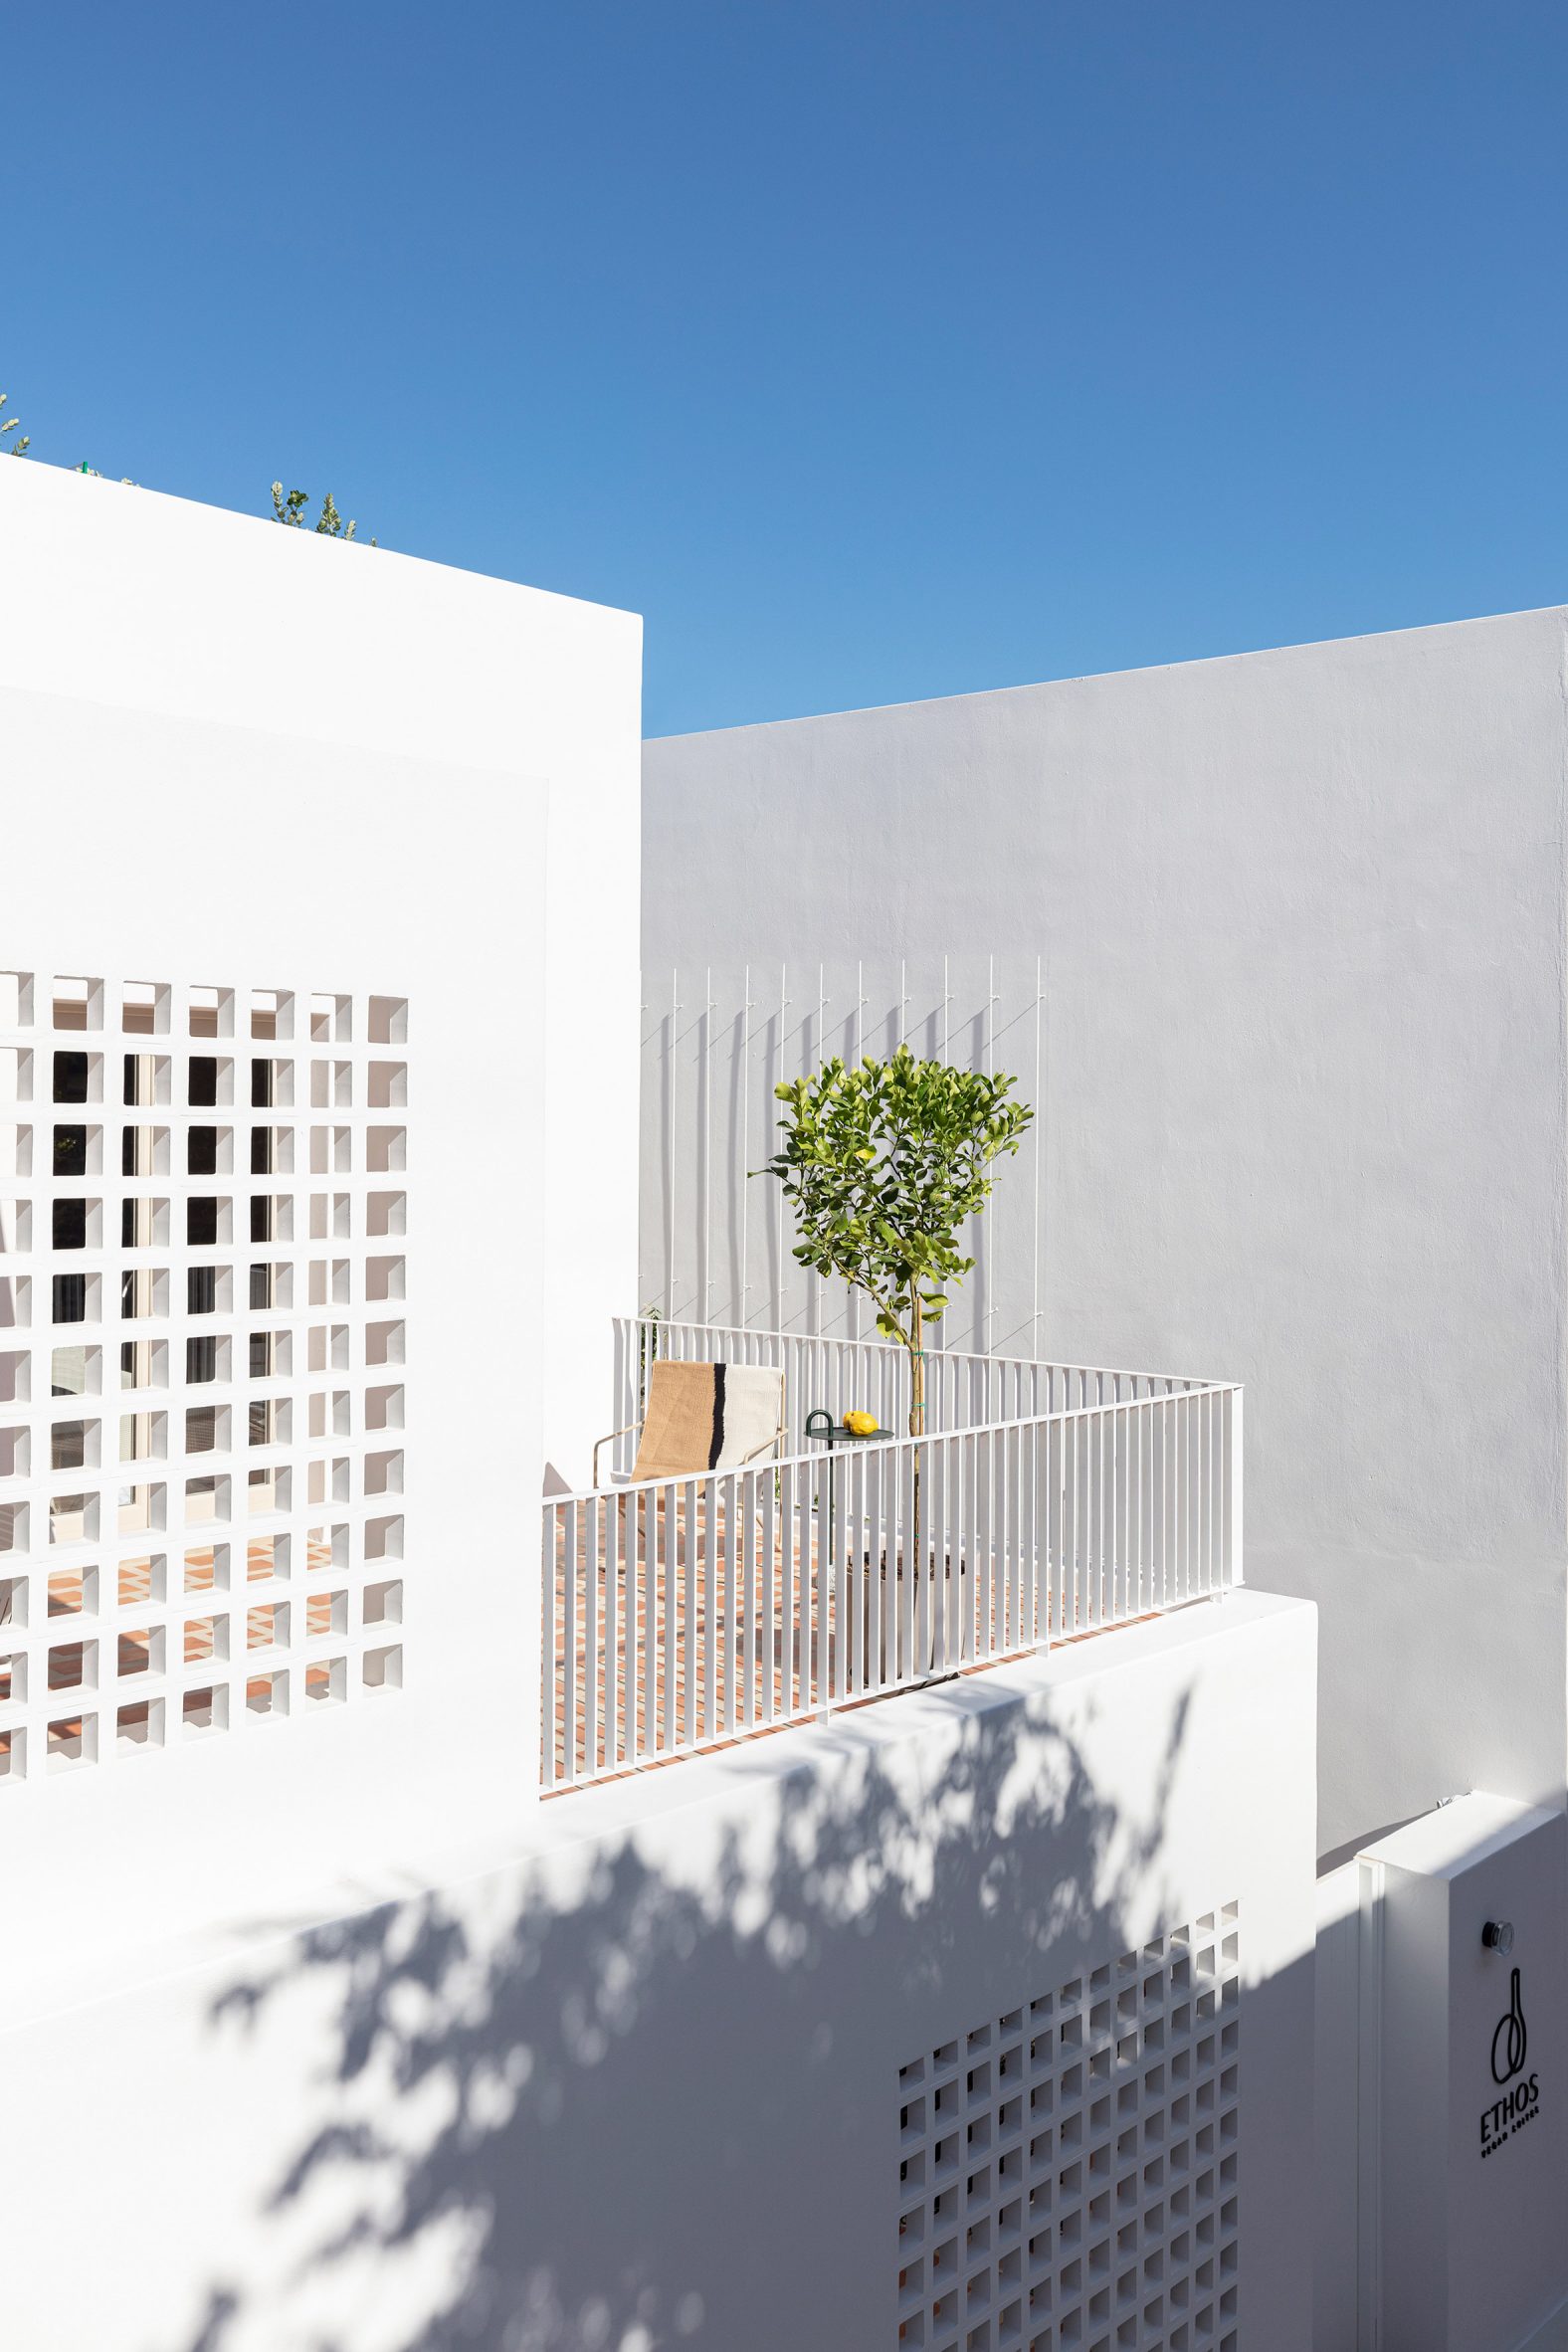 A cubist-style white building in Santorini